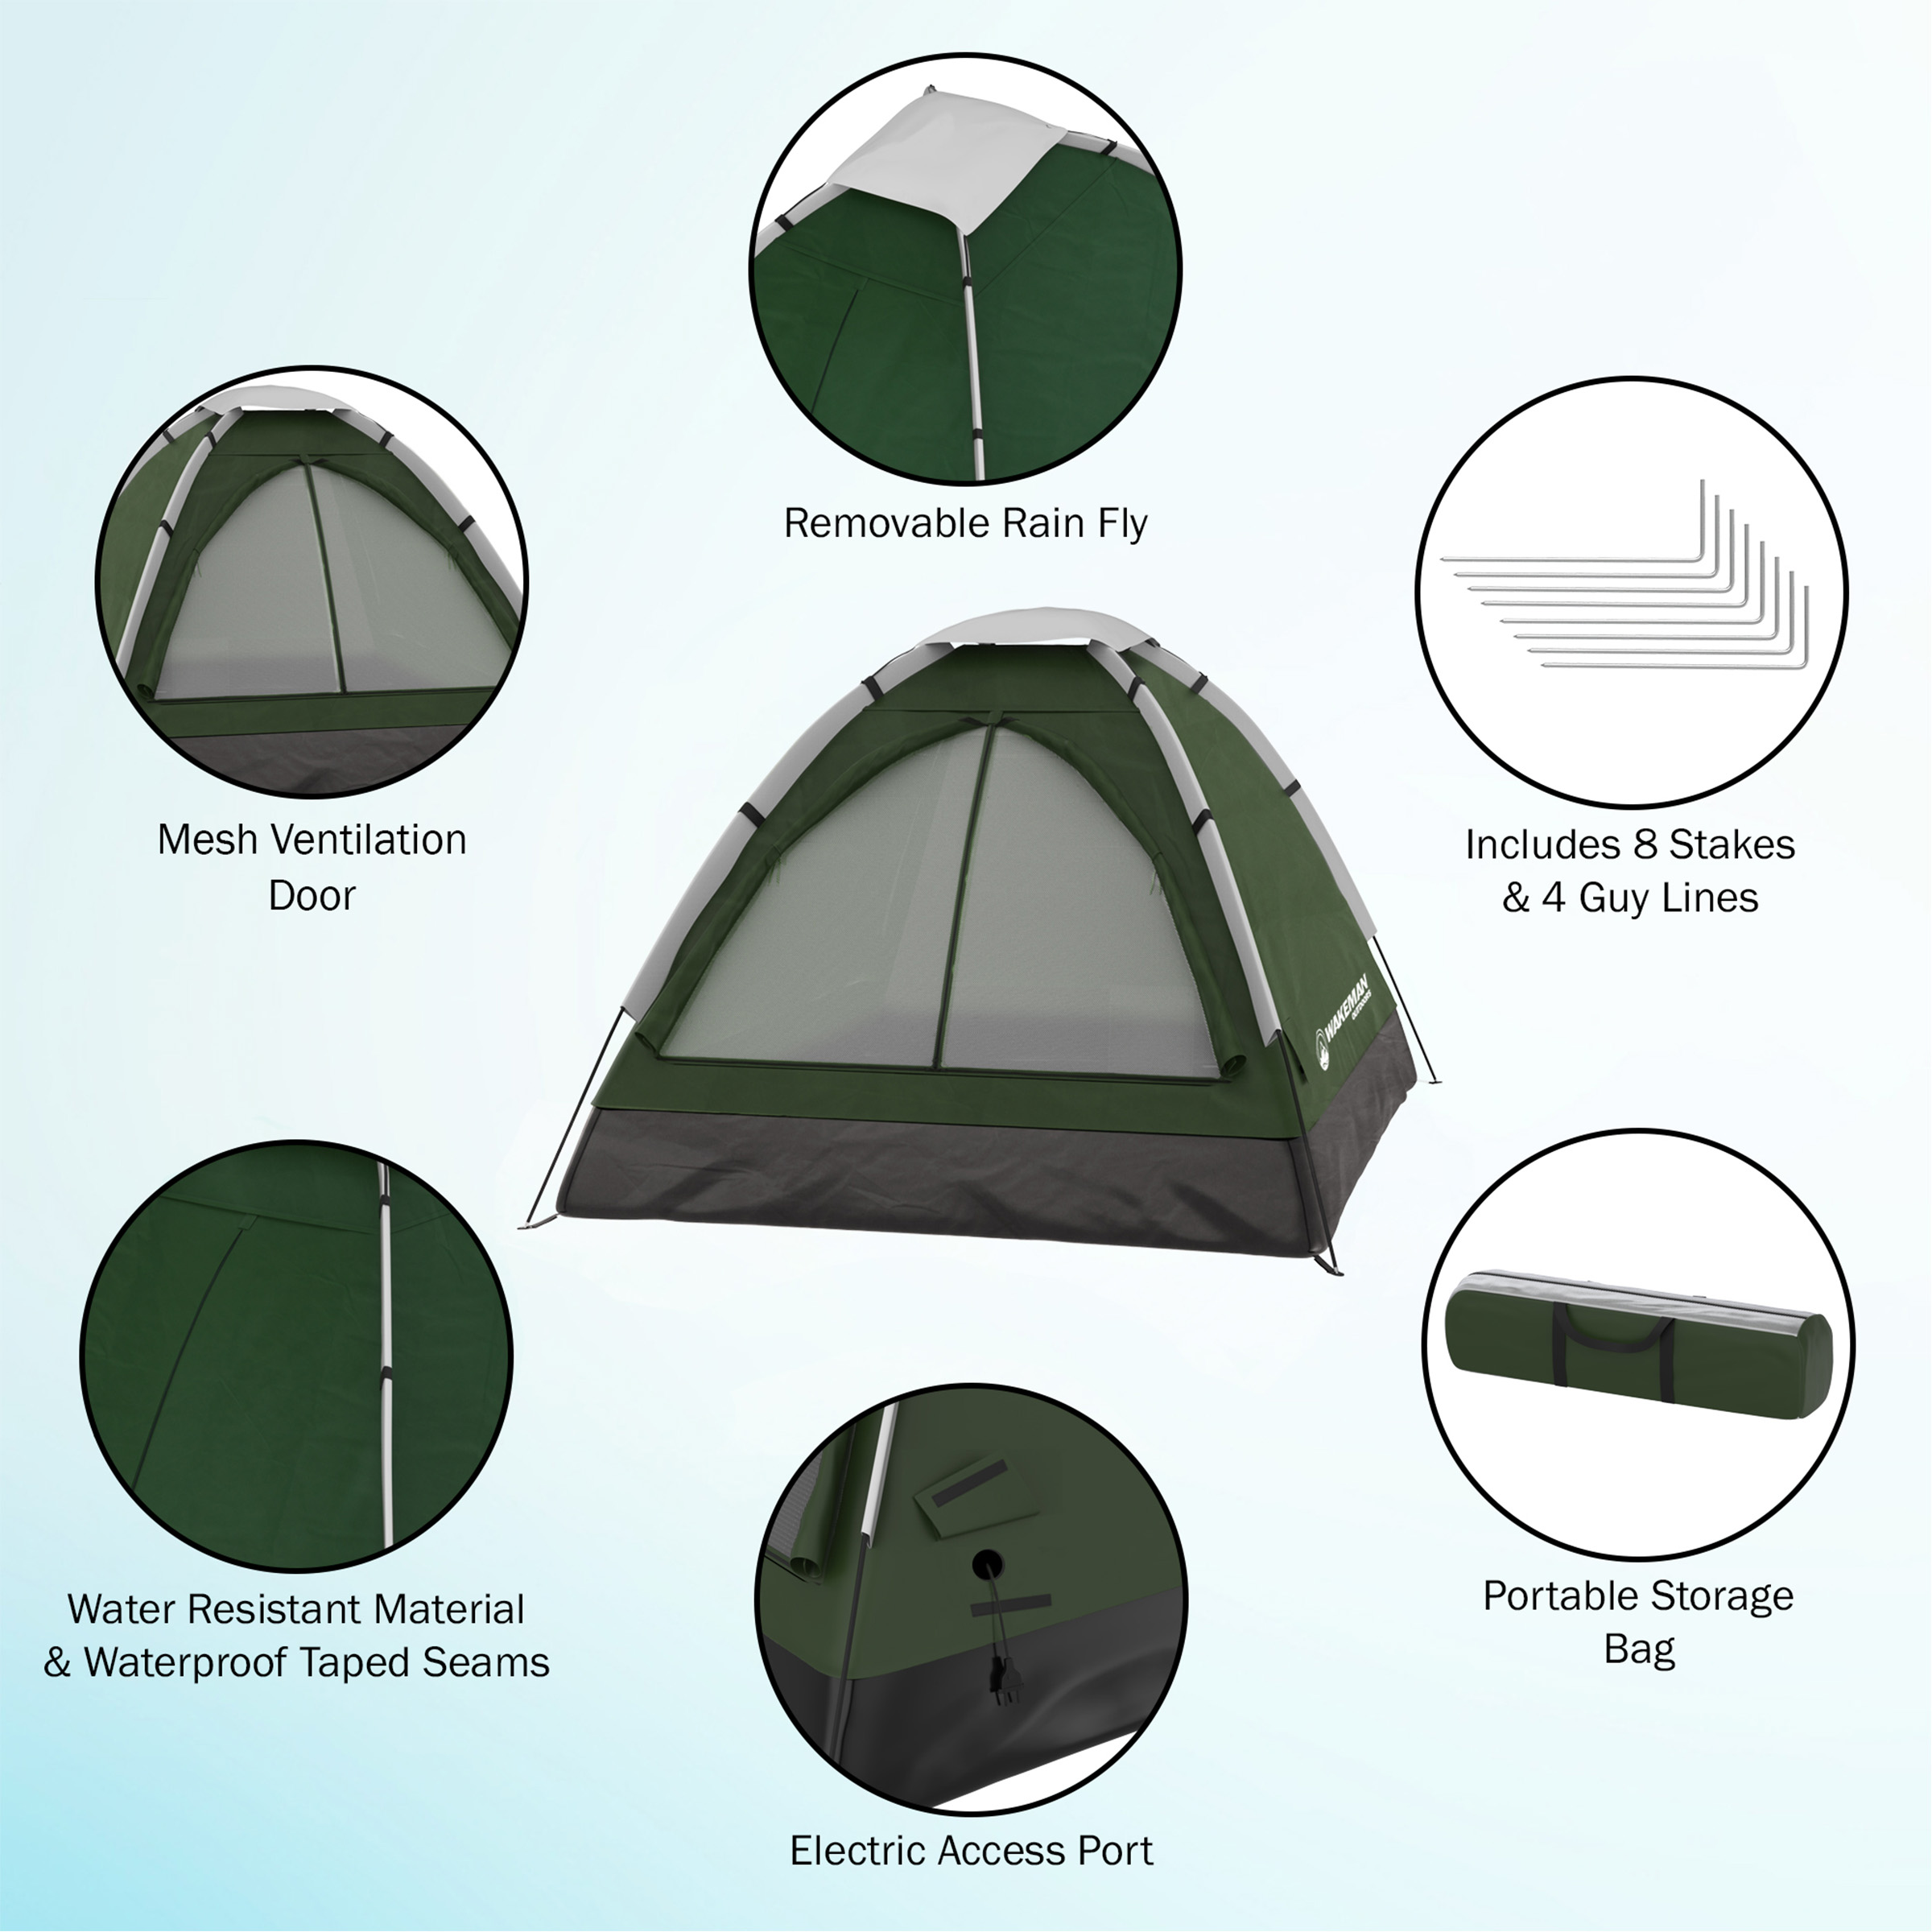 2-Person Dome Tent- Rain Fly & Carry Bag- Easy Set Up-Great for Camping, Backpacking, Hiking & Outdoor Music Festivals by Wakeman Outdoors - image 2 of 8